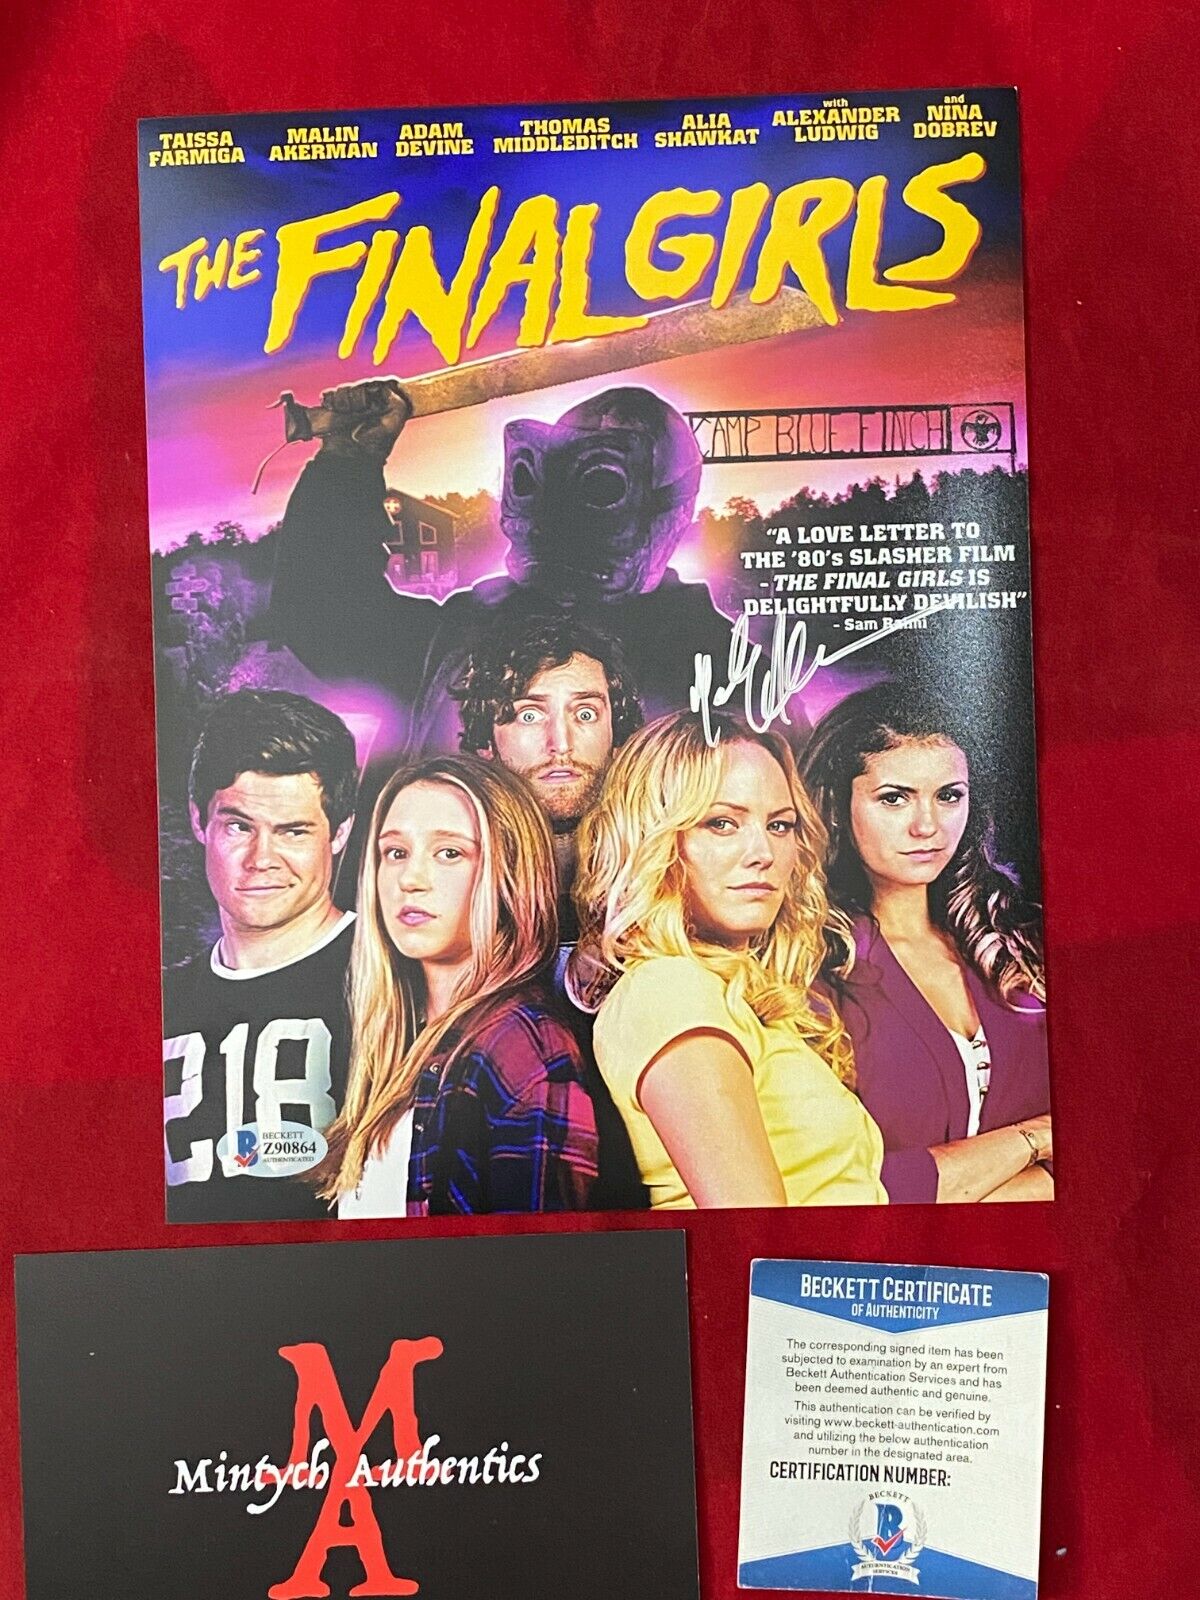 MALIN AKERMAN AUTOGRAPHED SIGNED 8x10 Photo Poster painting! THE FINAL GIRLS! BECKETT COA!